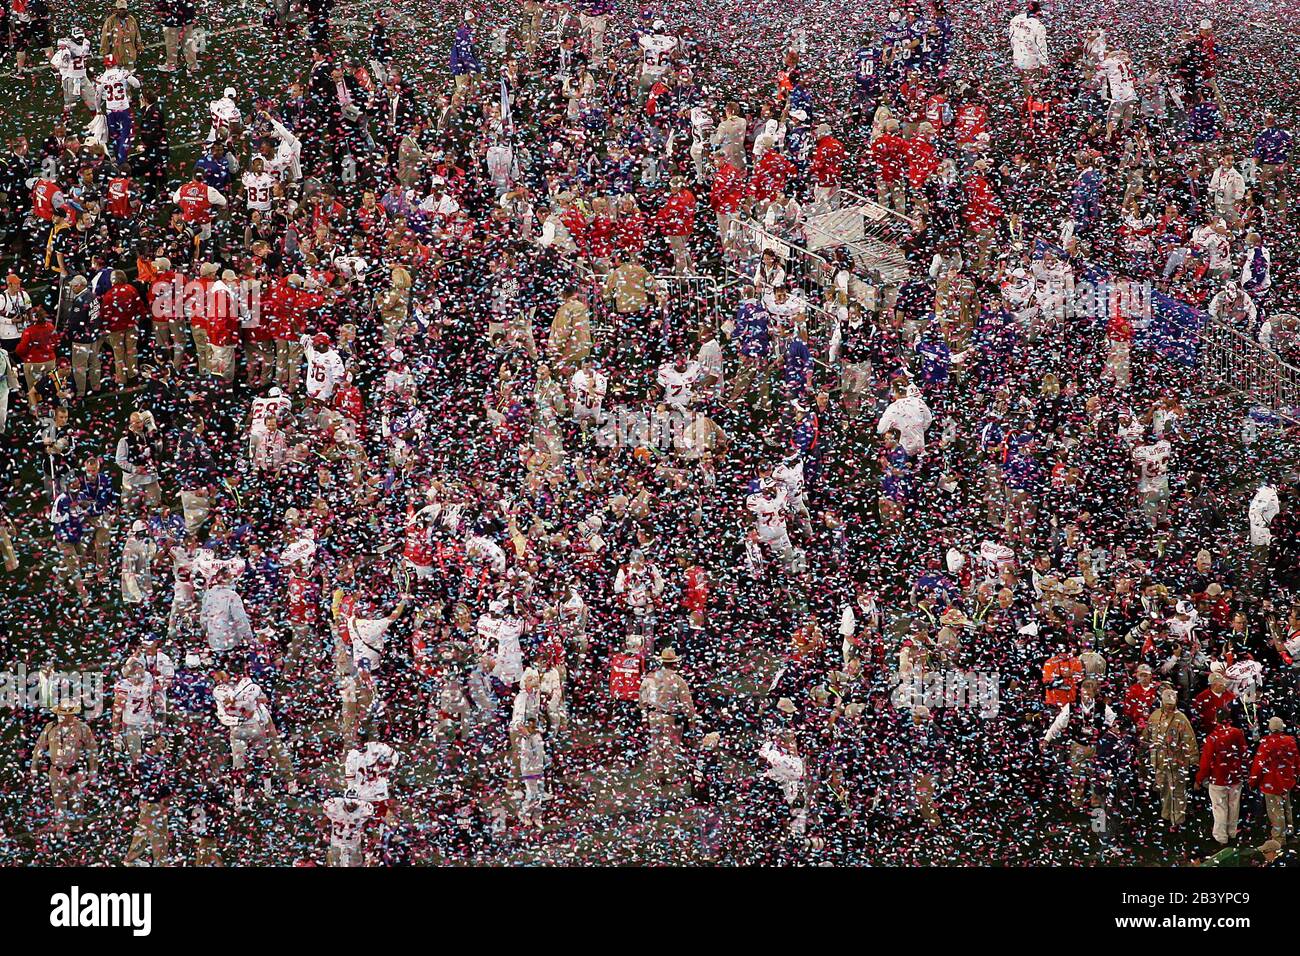 A view from the catwalk with confetti of the New York Giants celebriting a win after Super Bowl XLII at University of Phoenix stadium in Glendale, AZ Stock Photo